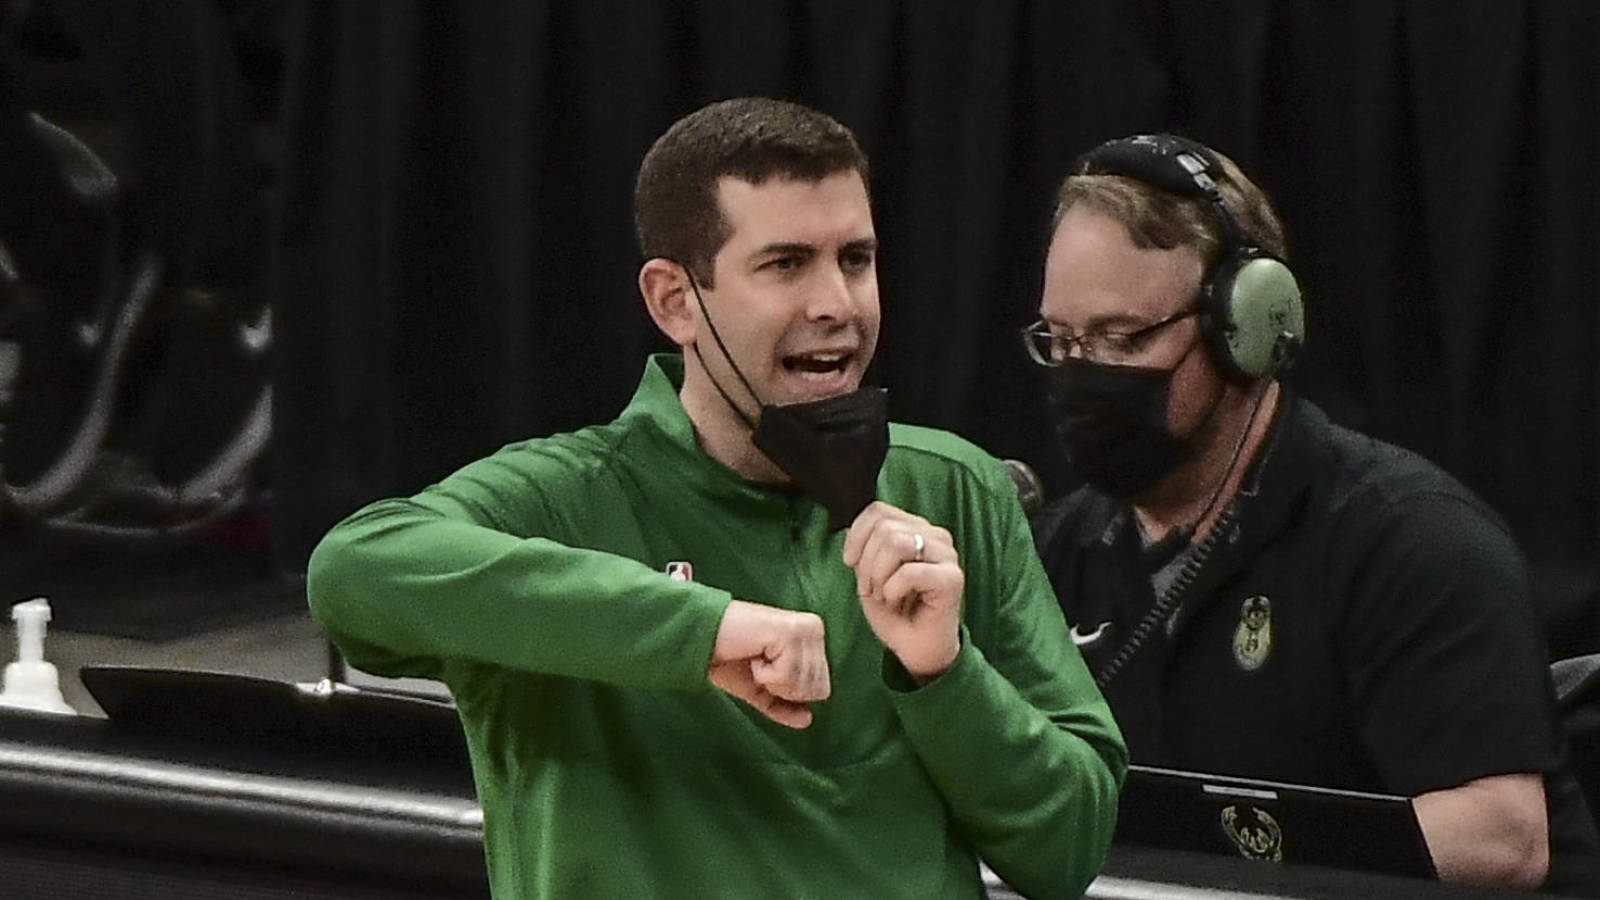 Mar 26, 2021; Milwaukee, Wisconsin, USA; Boston Celtics head coach Brad Stevens reacts in the second quarter during the game against the Milwaukee Bucks at Fiserv Forum. Mandatory Credit: Benny Sieu-USA TODAY Sports